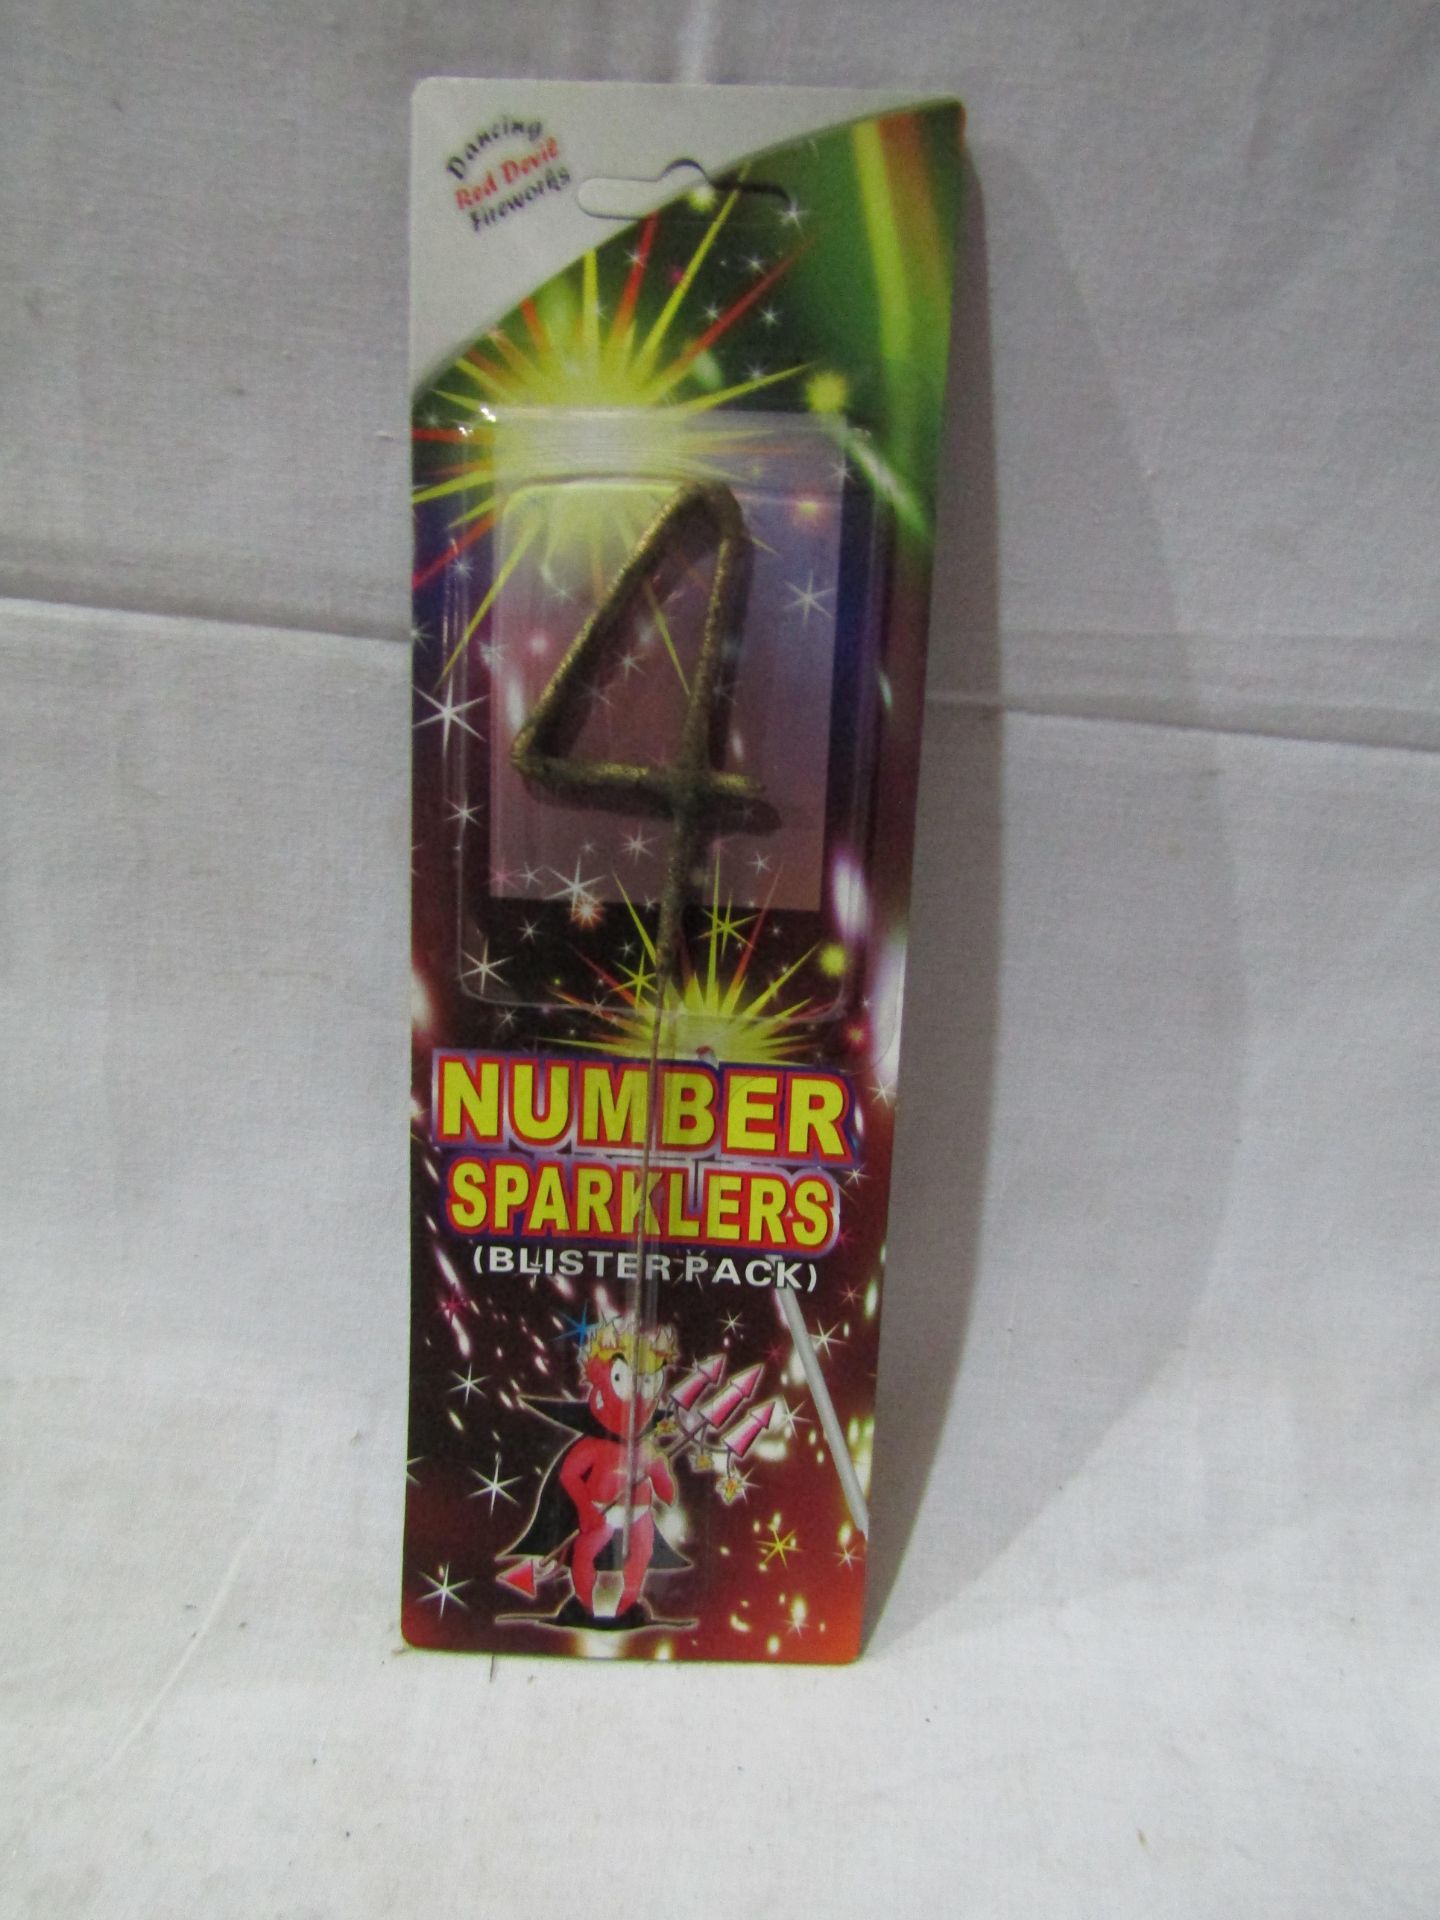 2 X Boxes Containing 20 in Total No 4 Sparklers For cakes New & Boxed